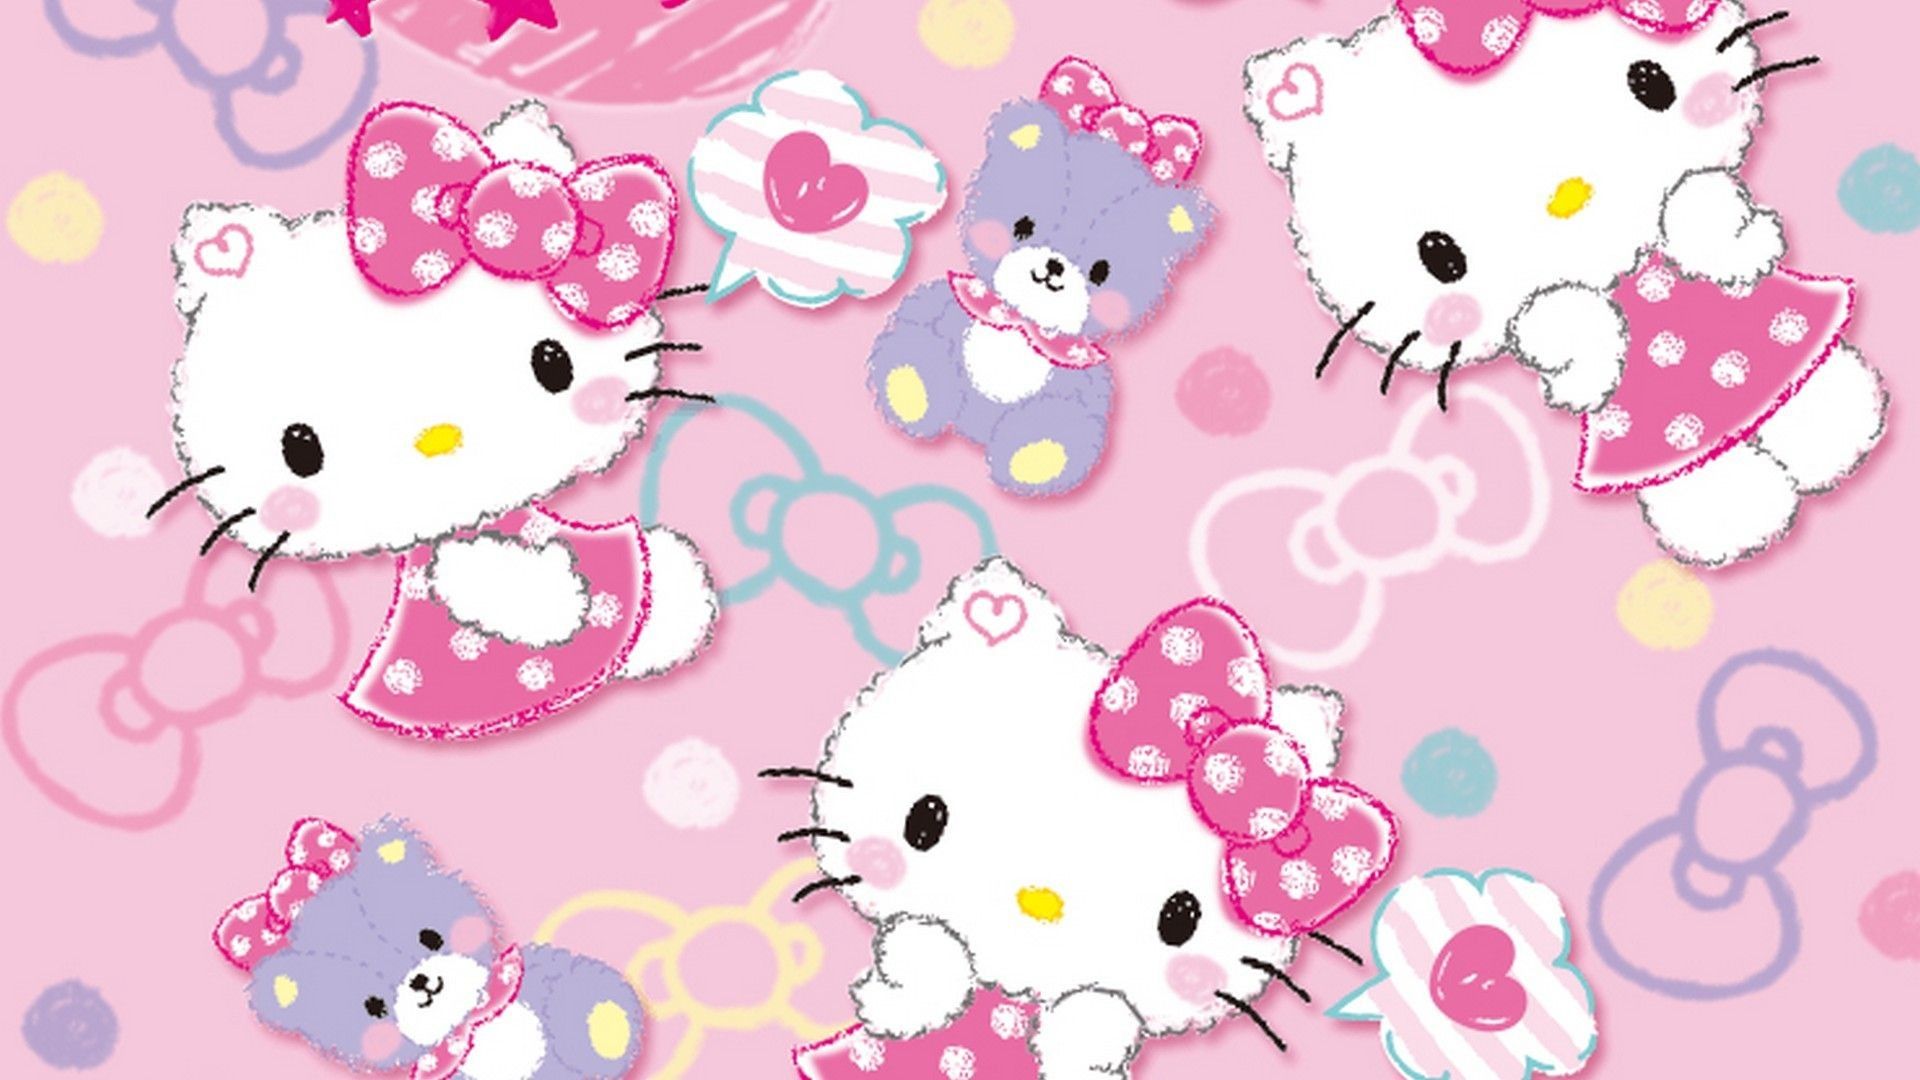 Pink Hello Kitty Computer Wallpapers - Wallpaper Cave